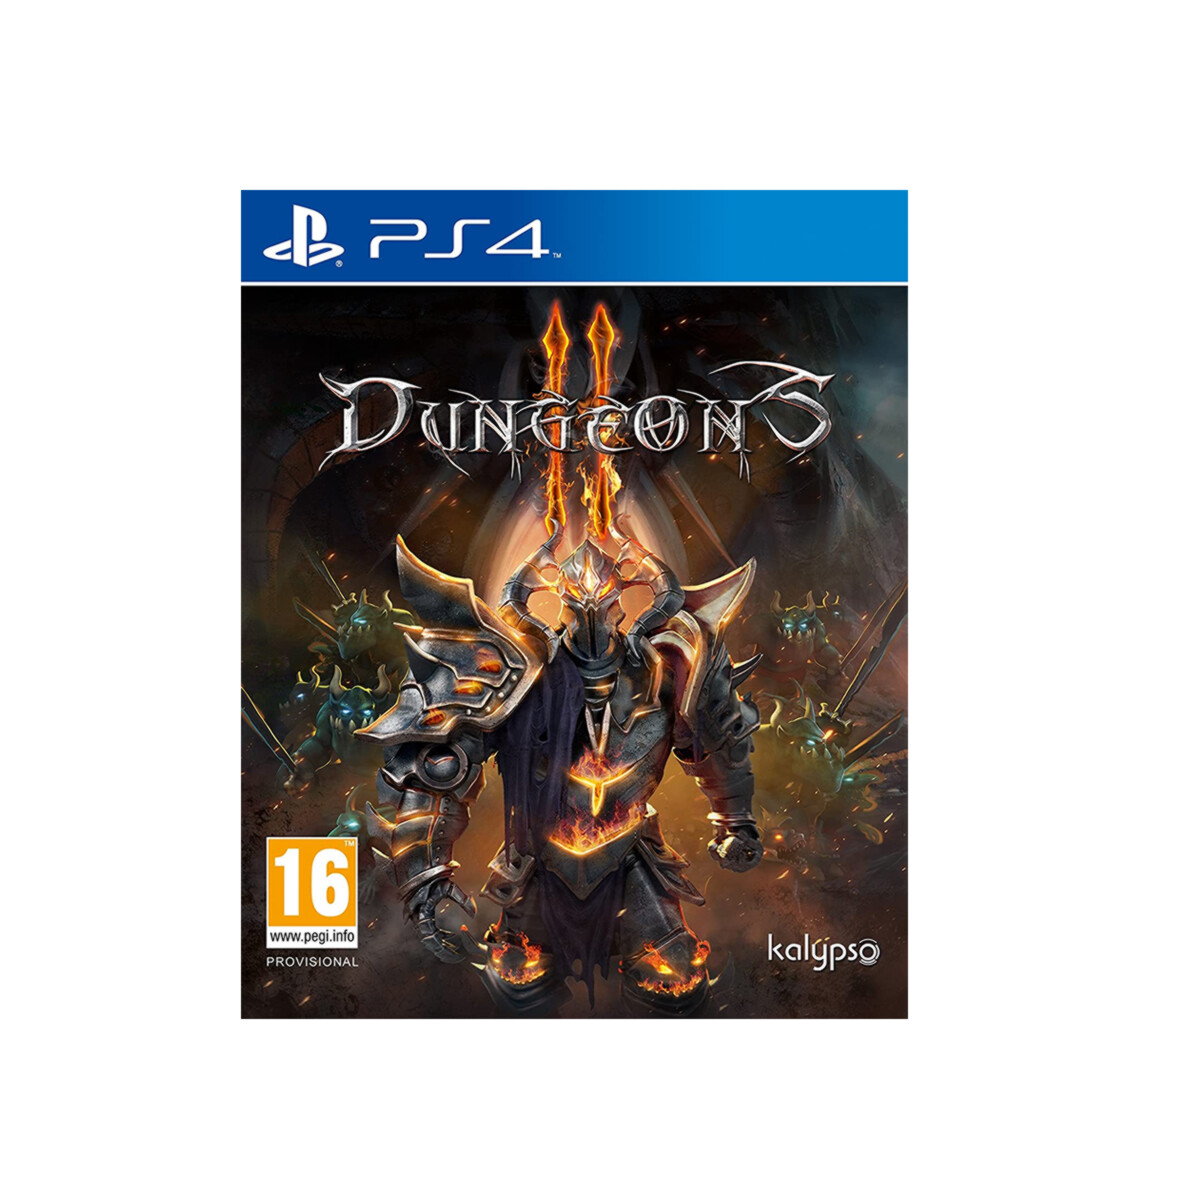 PS4 DUNGEONS 2 